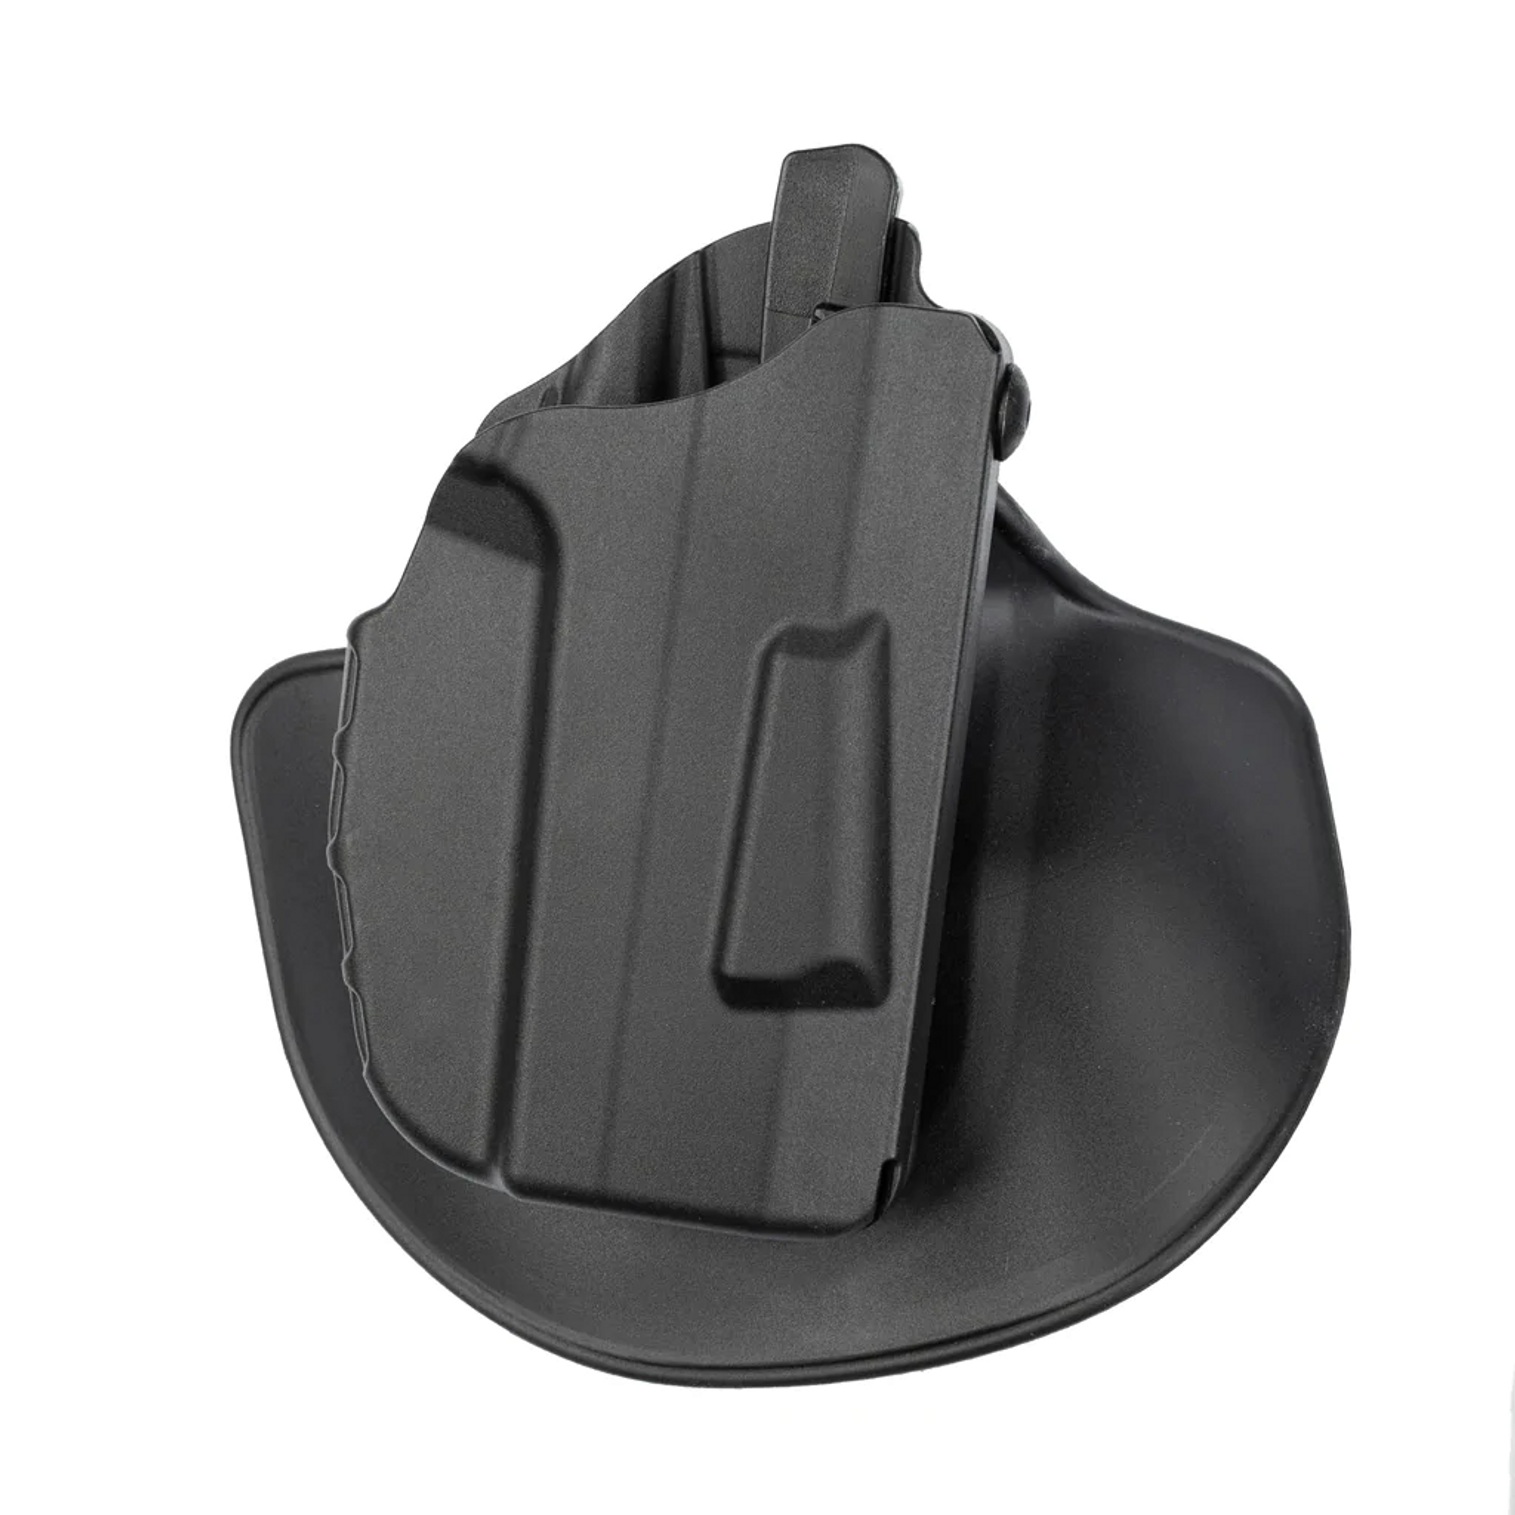 Model 7378 7ts Als Concealment Paddle And Belt Loop Combo Holster For Glock 17 W/ Light - KR7378-8325-412